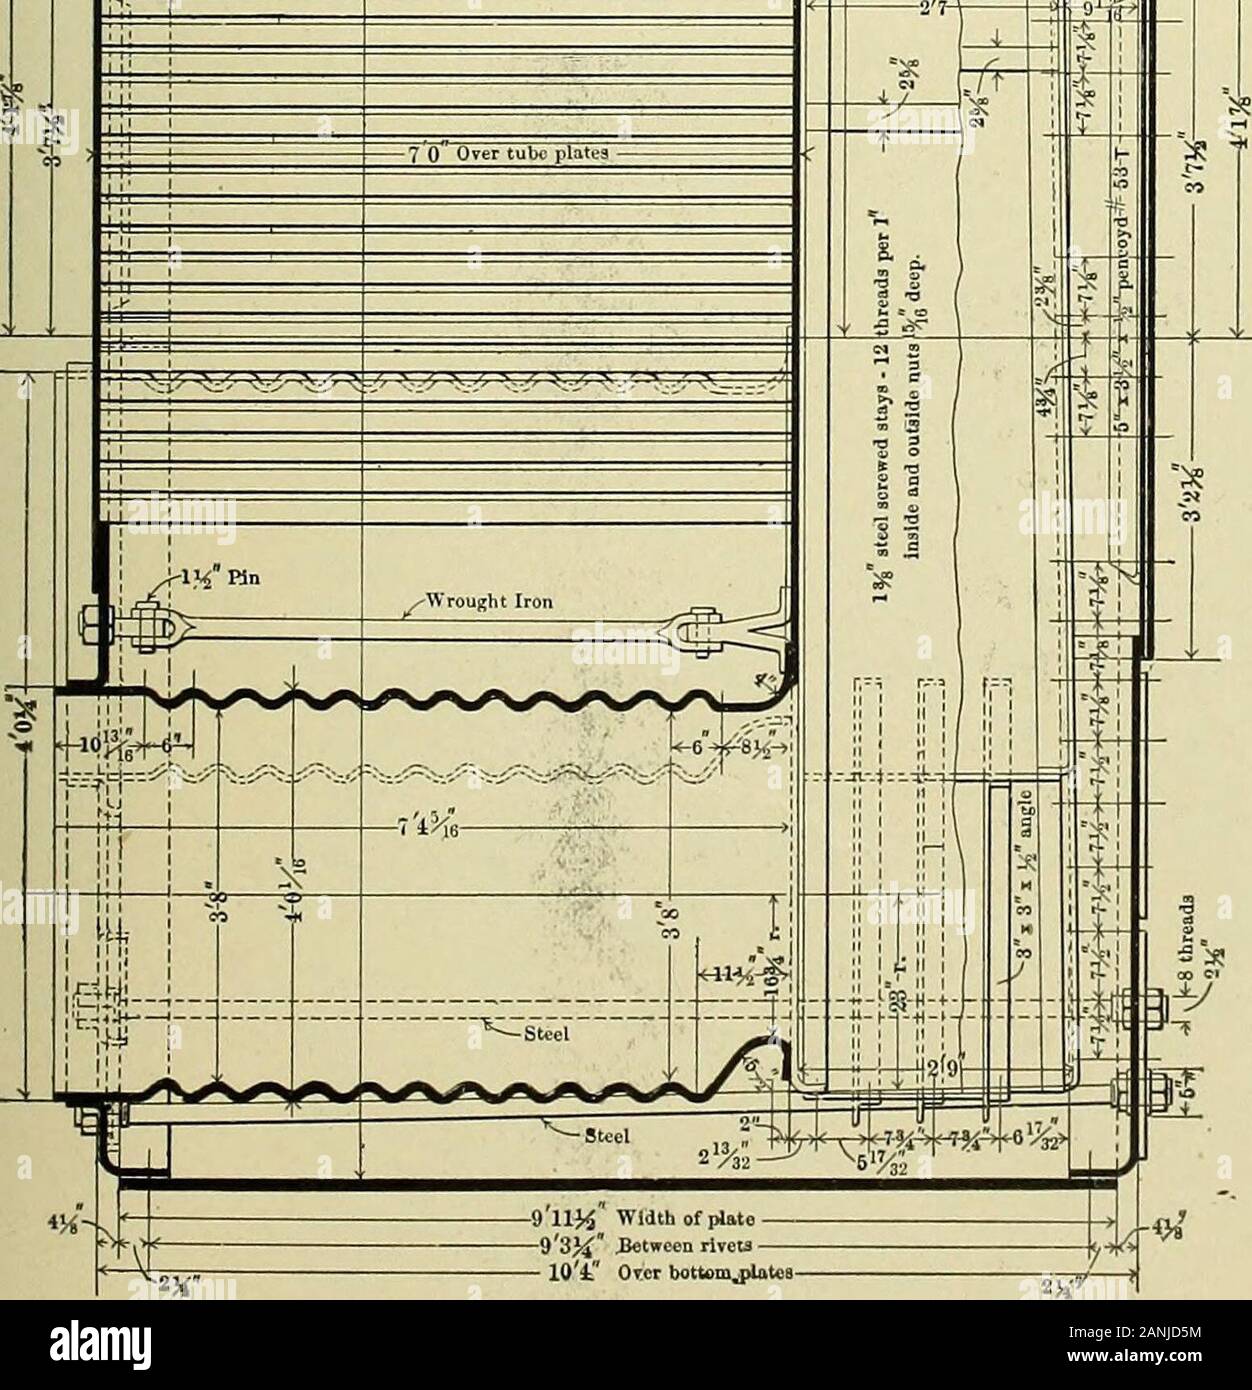 Laying out for boiler makers and sheet metal workers; a practical treatise on the layout of boilers, stacks, tanks, pipes, elbows, and miscellaneous sheet metal work . -2M  40-lJi ateel rivetsI^IQ drilled Jioles Uofc- ^Location of steam pipabulto be determiQed later.. Stock Photo